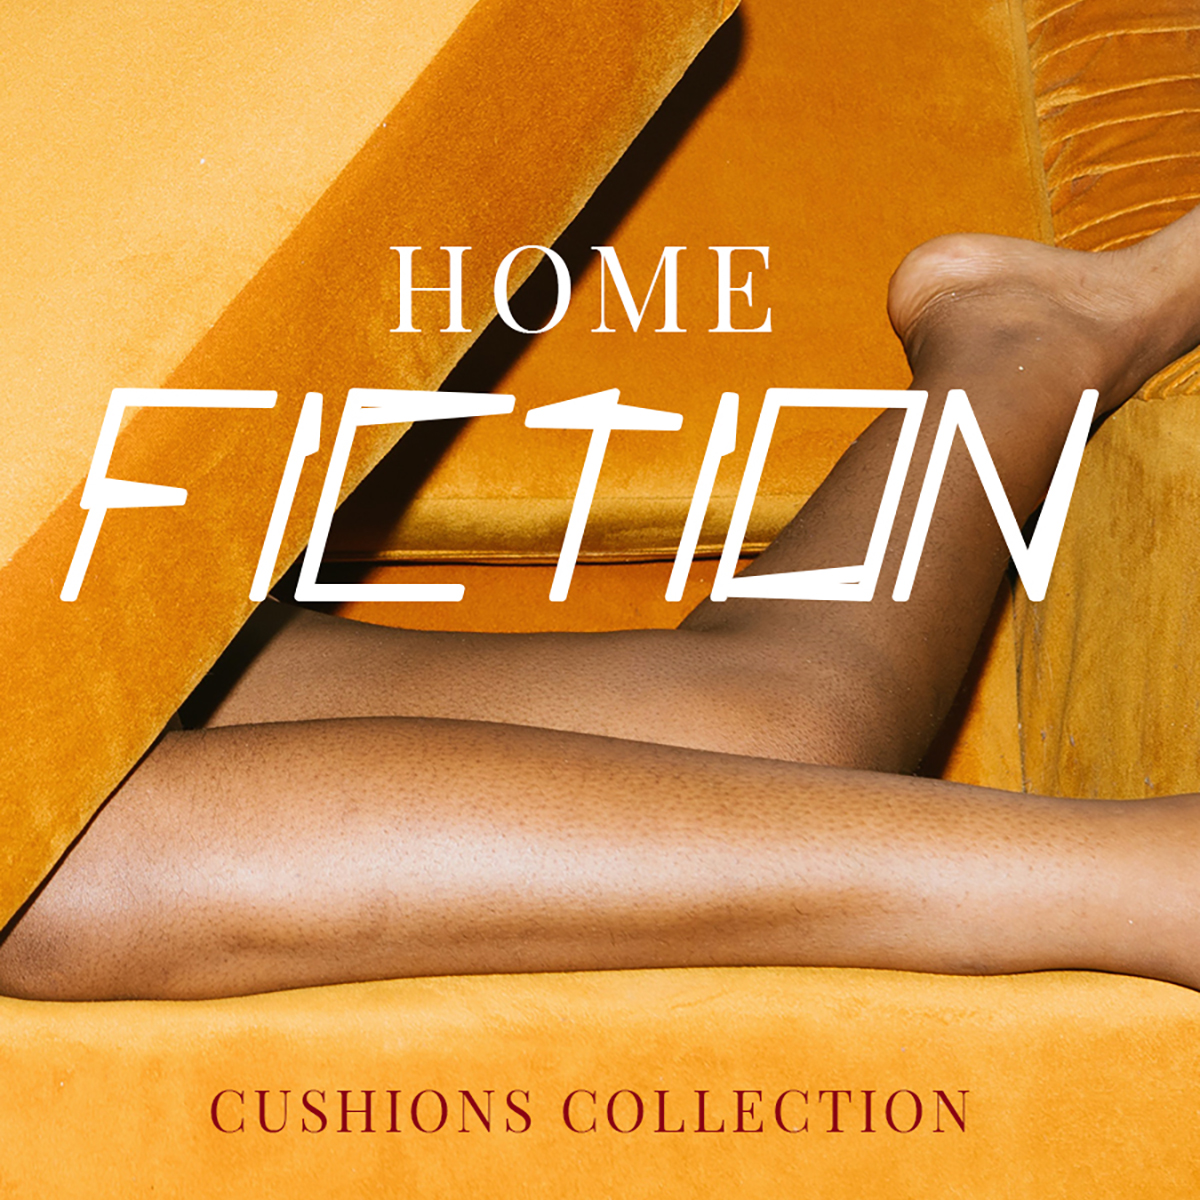 ACH Collection - Home Fiction Pillow Series